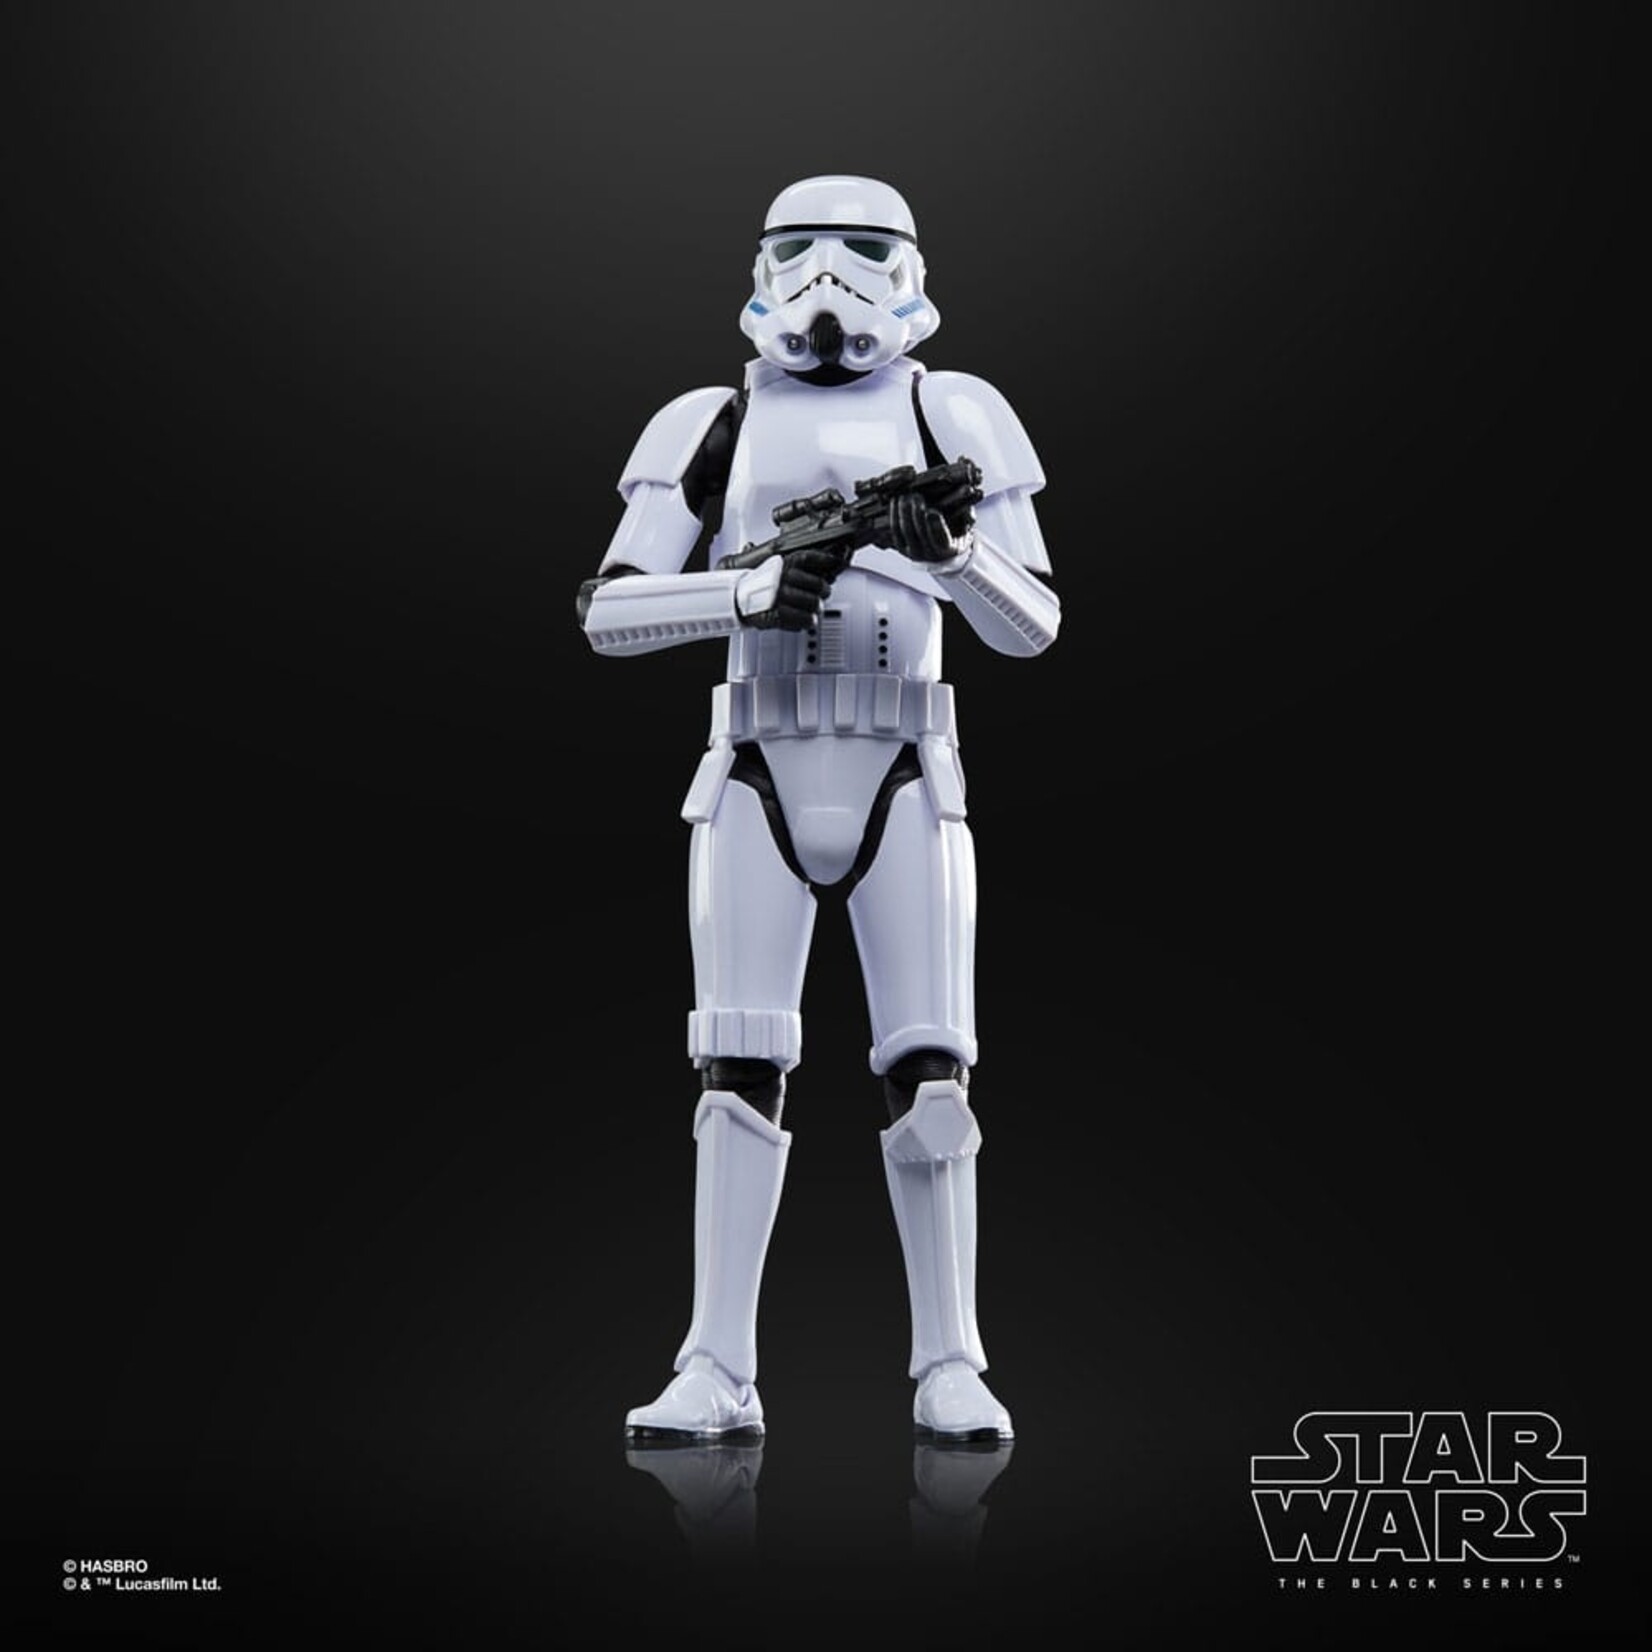 Hasbro Hasbro Star Wars The Black Series Archive Action Figure Imperial Stormtrooper 15 cm